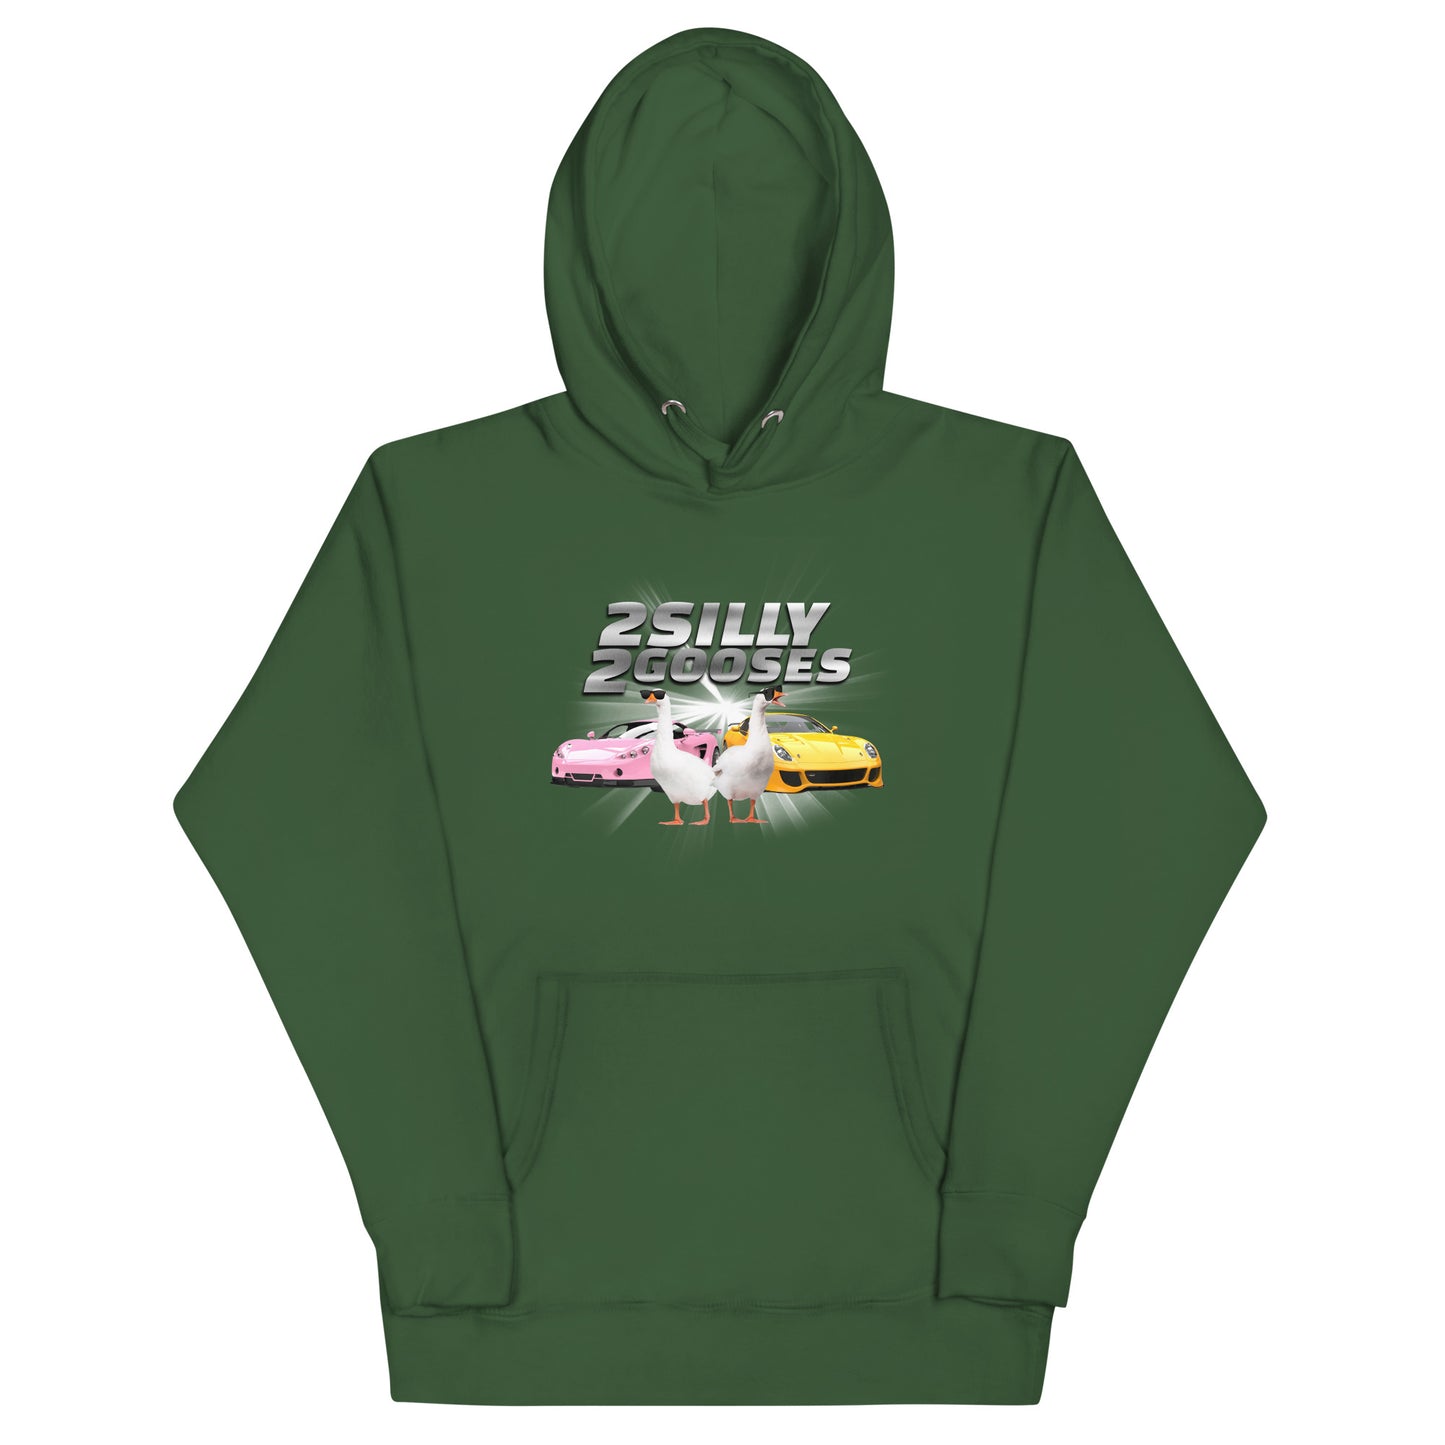 2 Silly 2 Gooses Unisex Hoodie